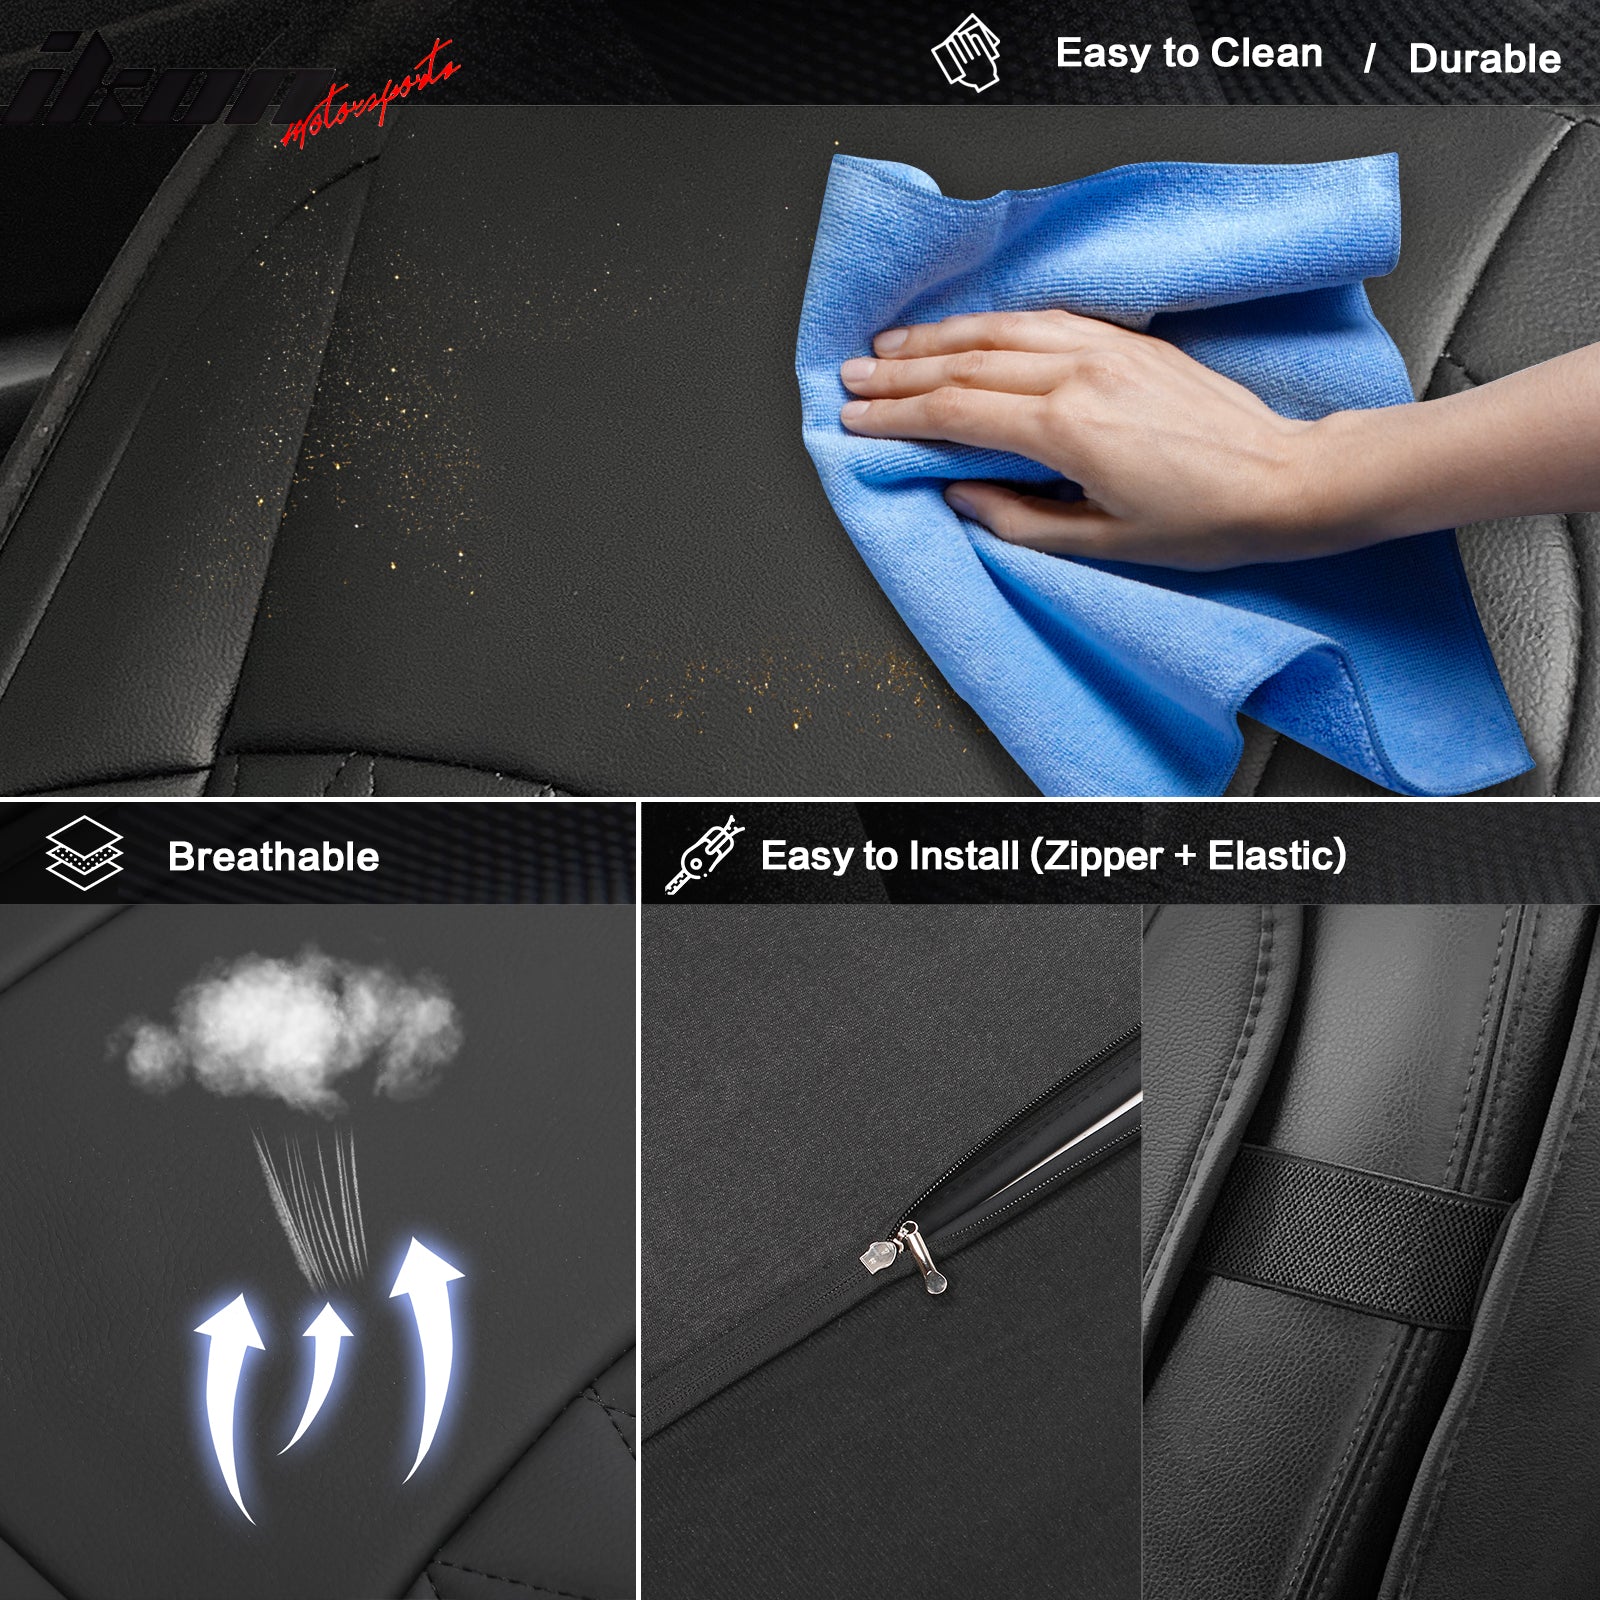 Universal Car Seat Cover Cushion Protector 03 Style PU Leather